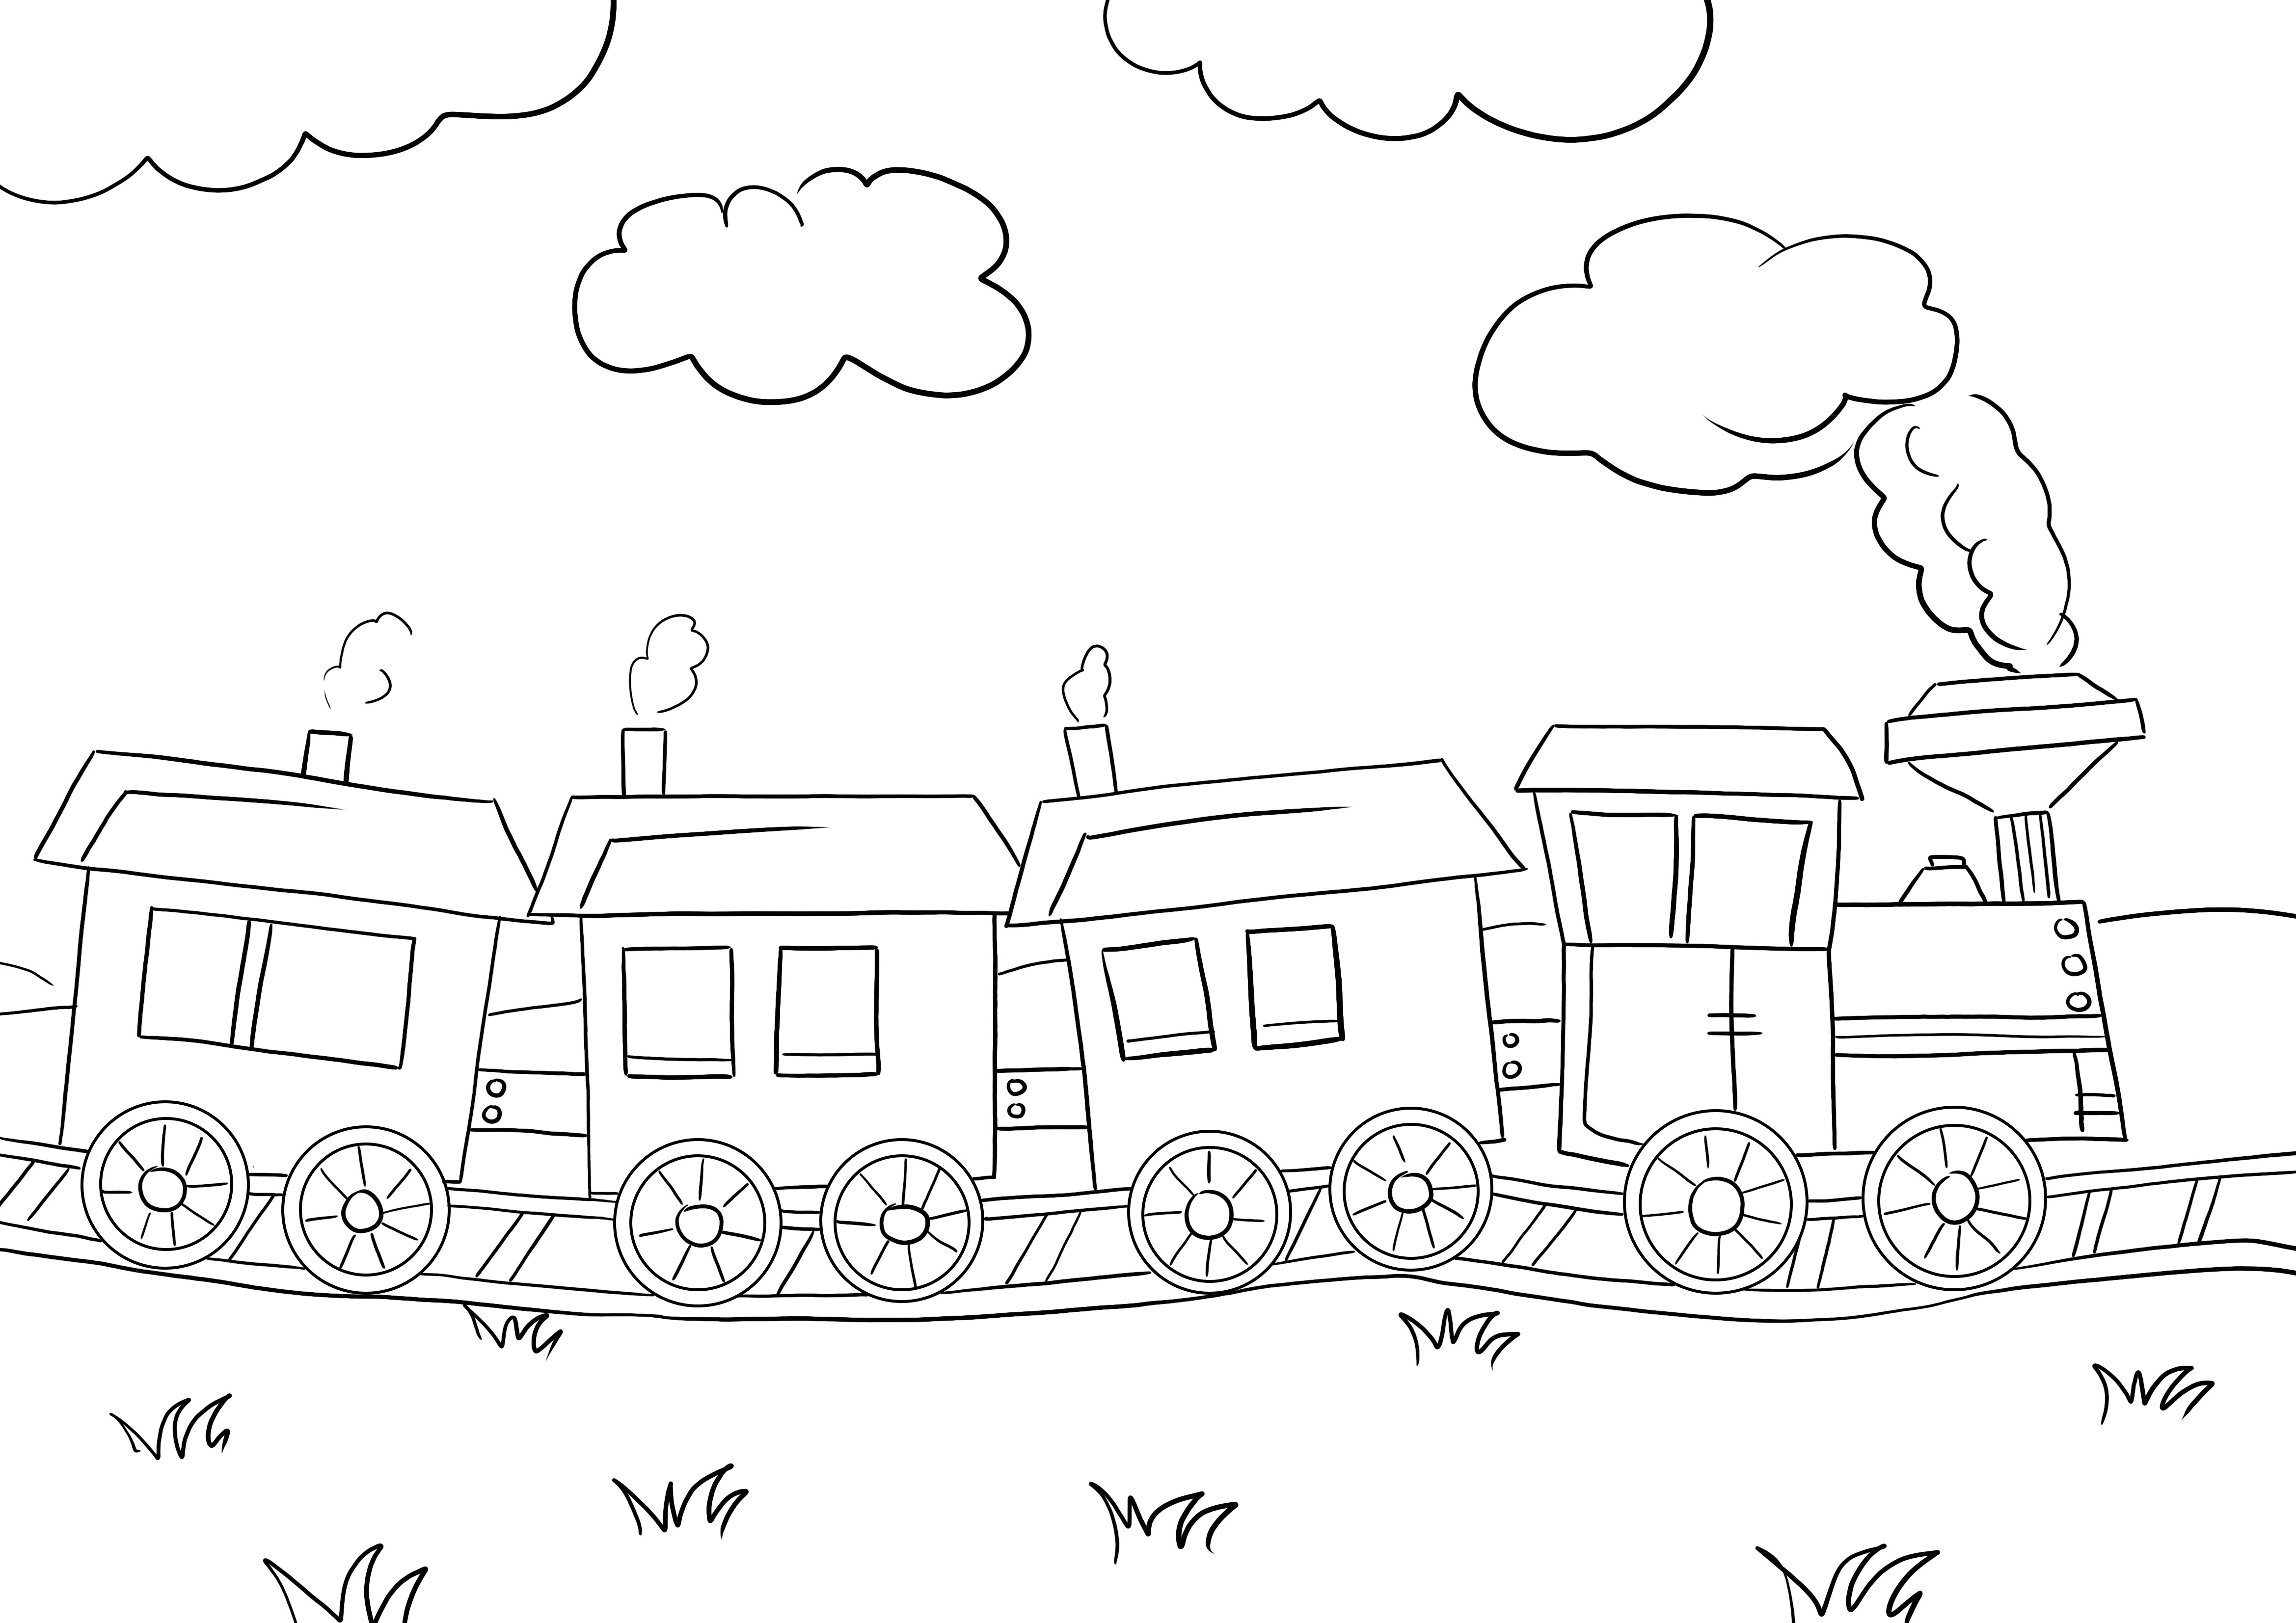 Free printable of a fast-going train for kids to color and learn with fun